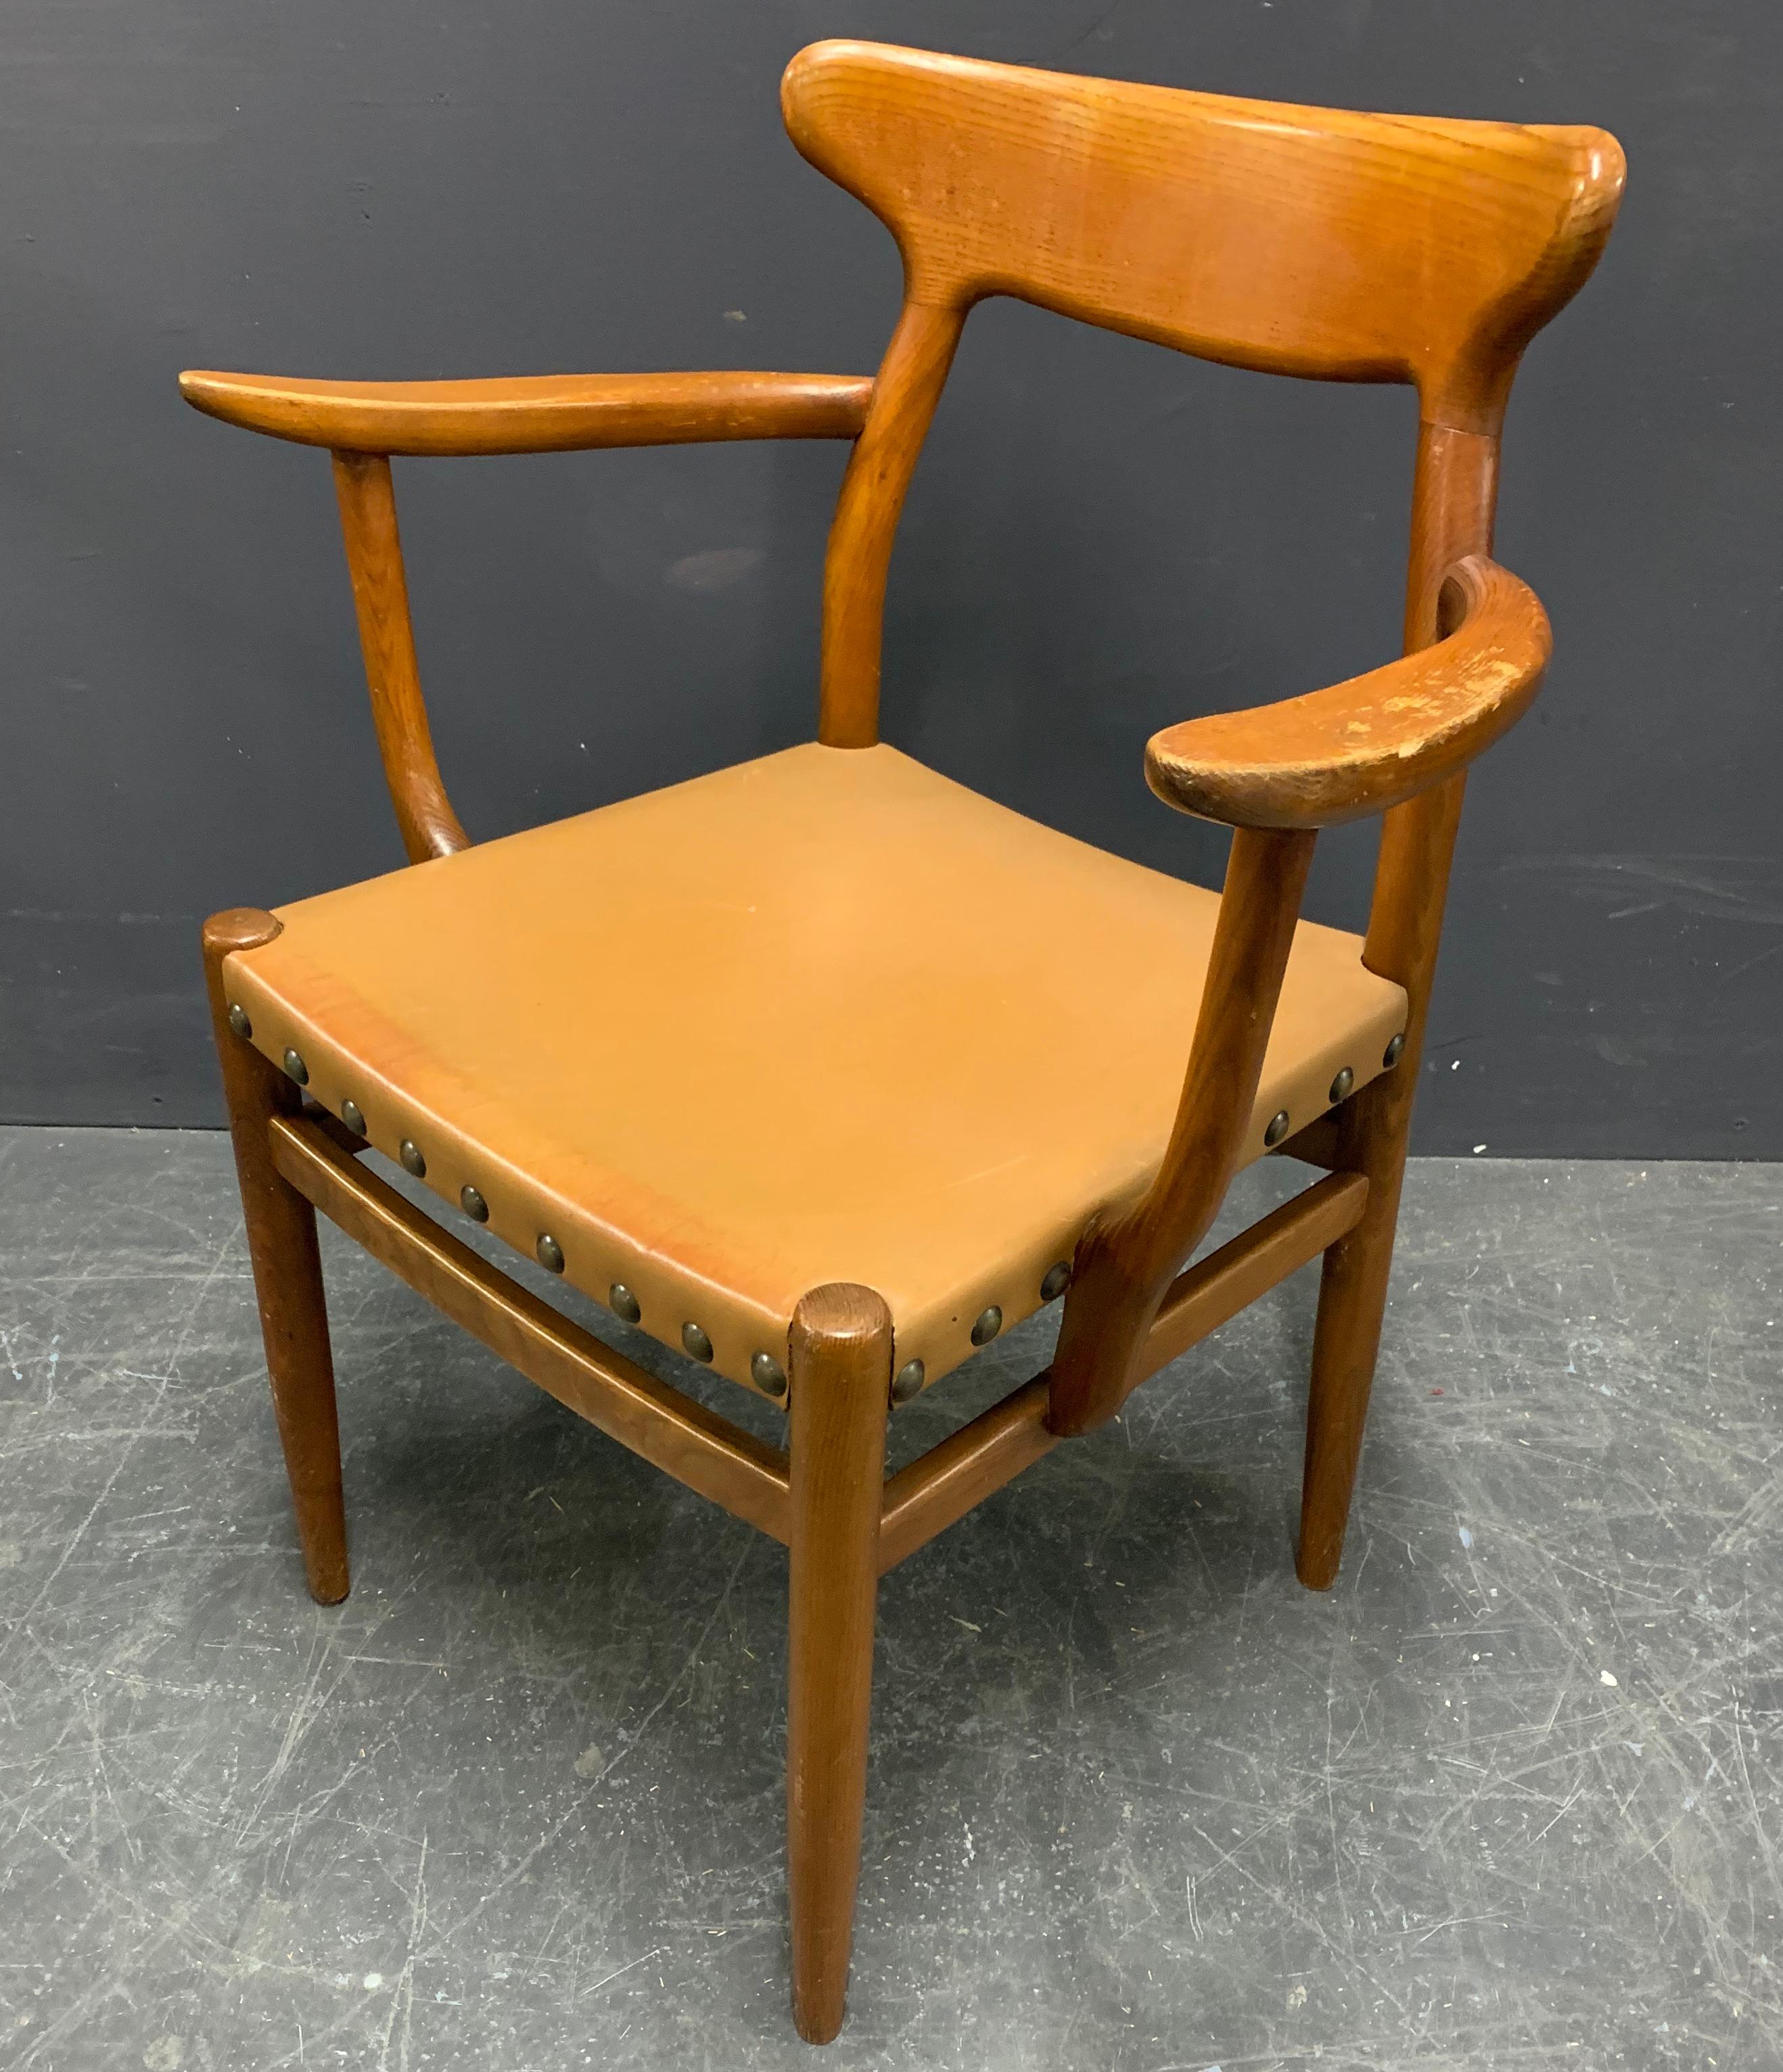 Attributed to guillerme et chambron. All chairs are handmade and the seats are upholstered in saddle leather. 6 sidechairs also available.